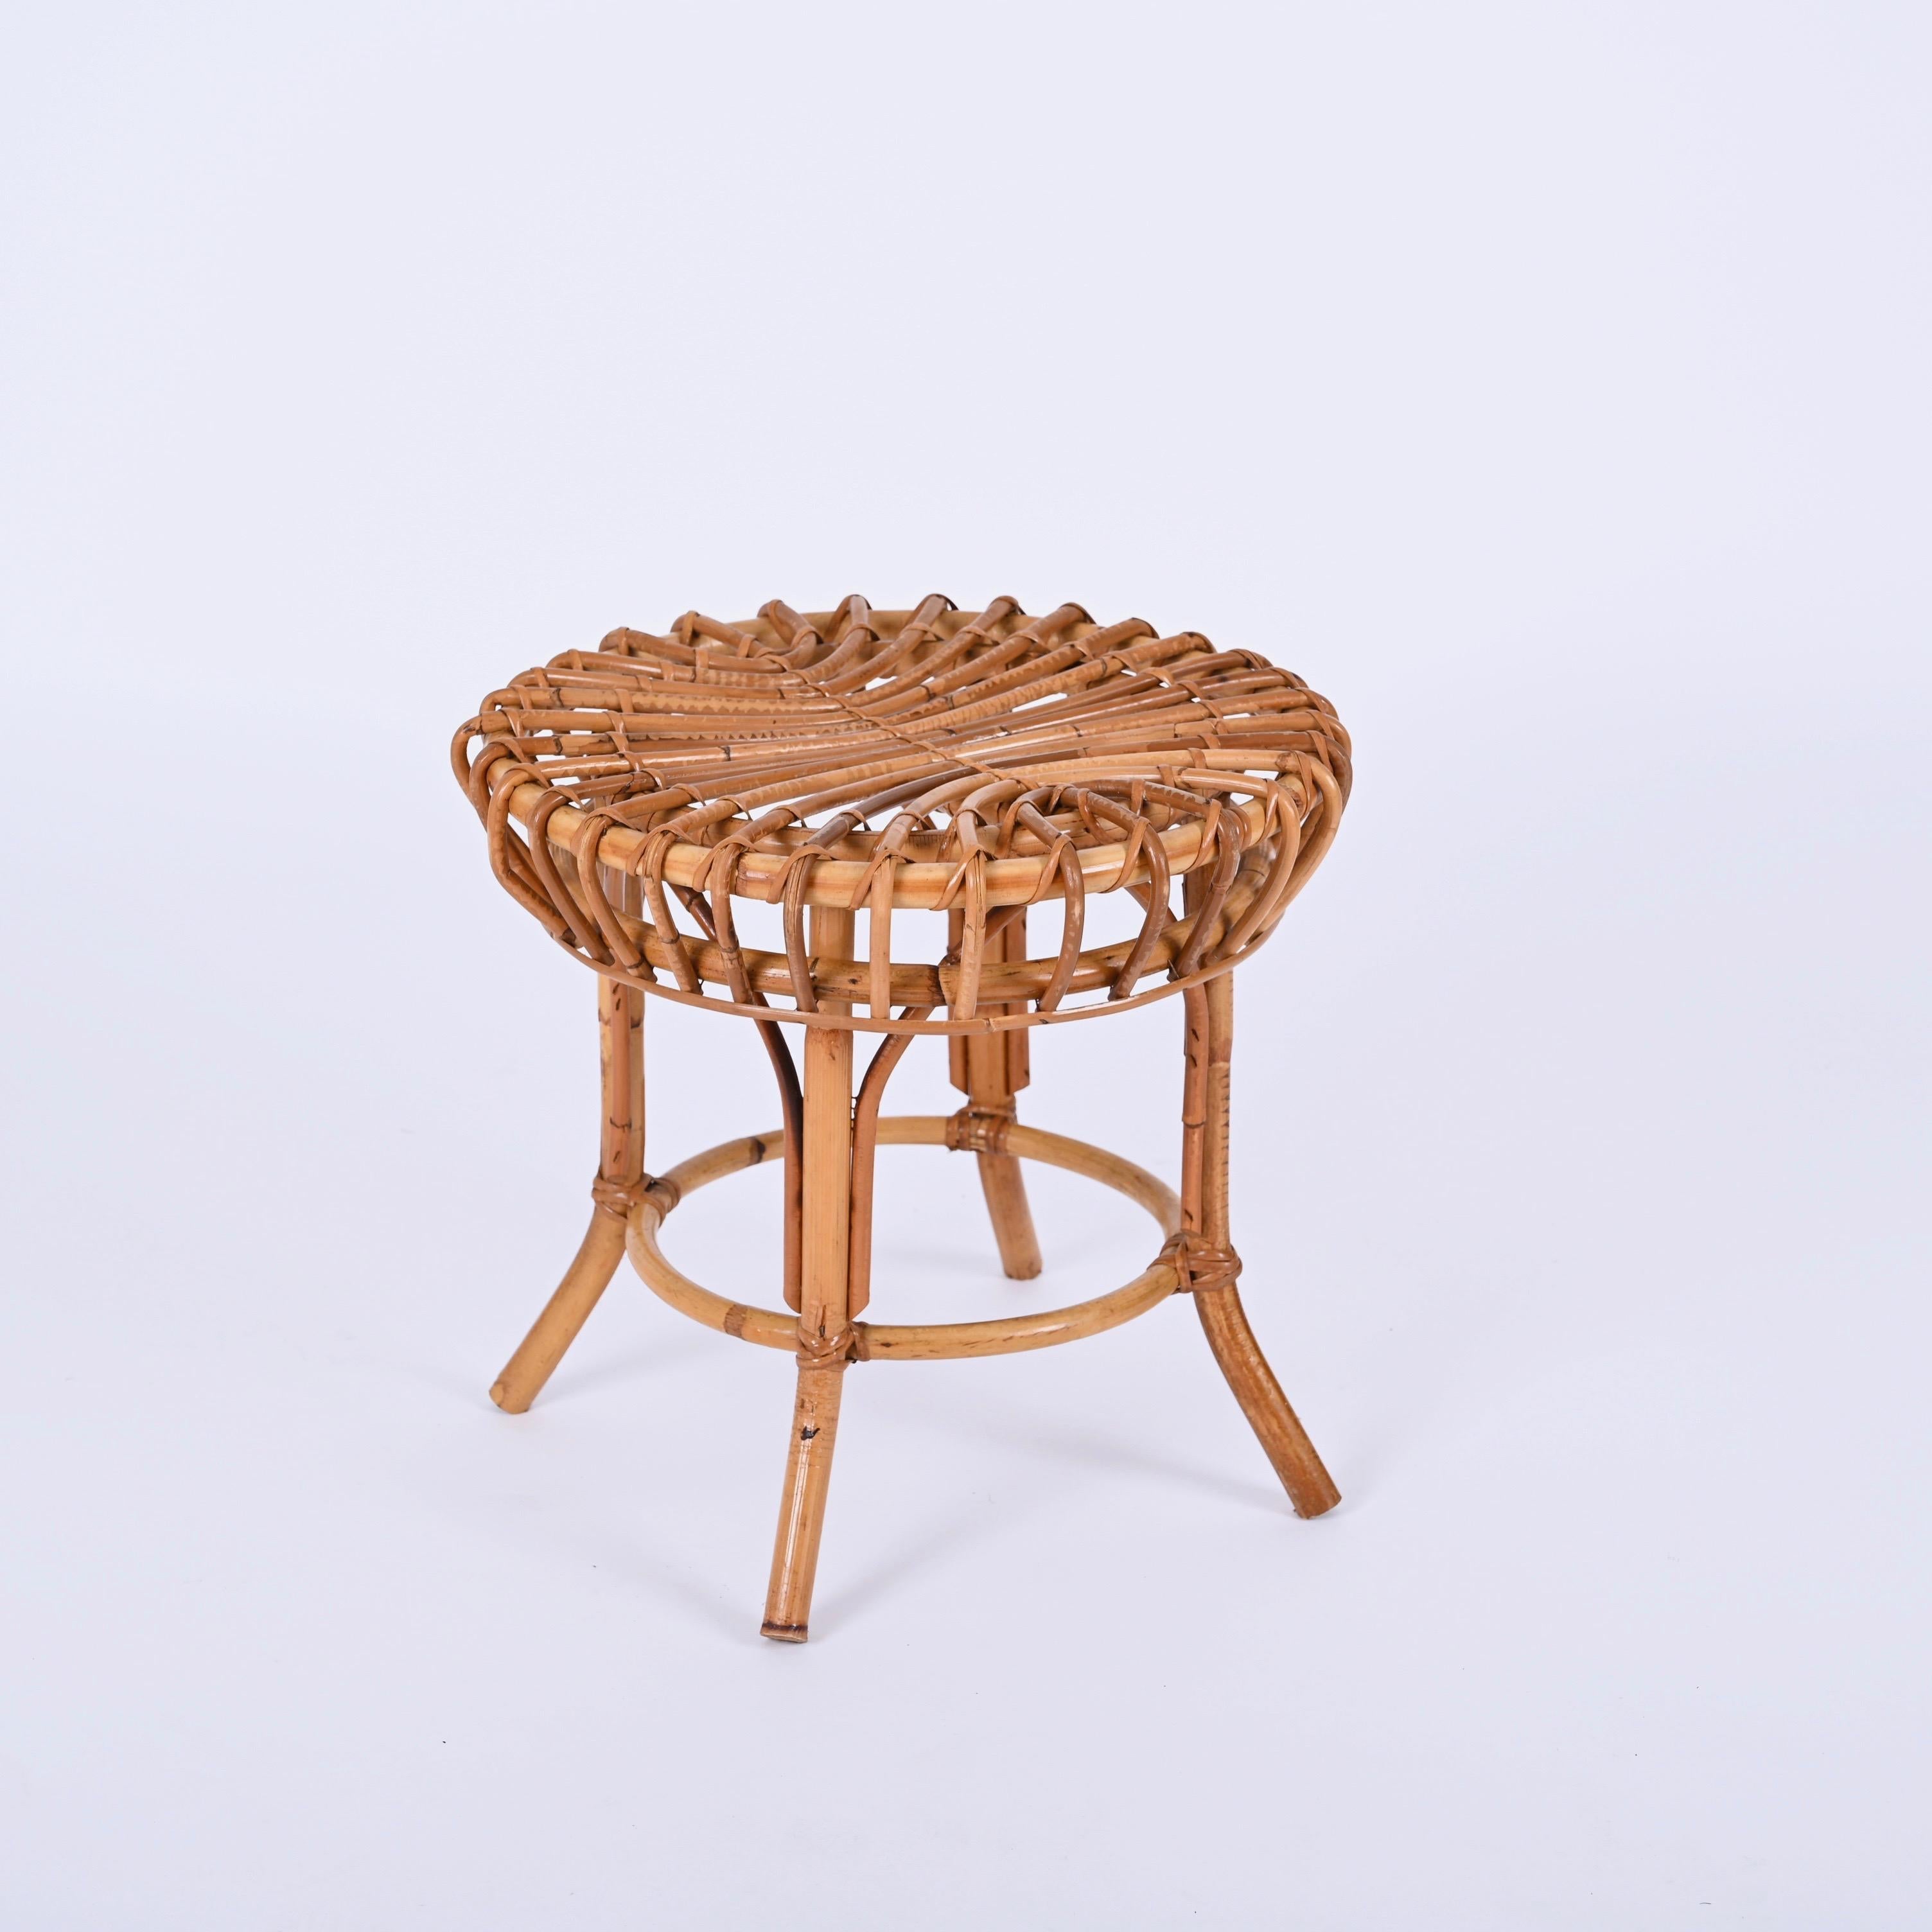 Gorgeous mid-century round bamboo & wicker stool. Franco Albini designed this piece in Italy during the 1960s.

The pouf features a beautiful combination of curved bamboo, rattan and wicker. Fully hand-crafted with perfect proportions, this item